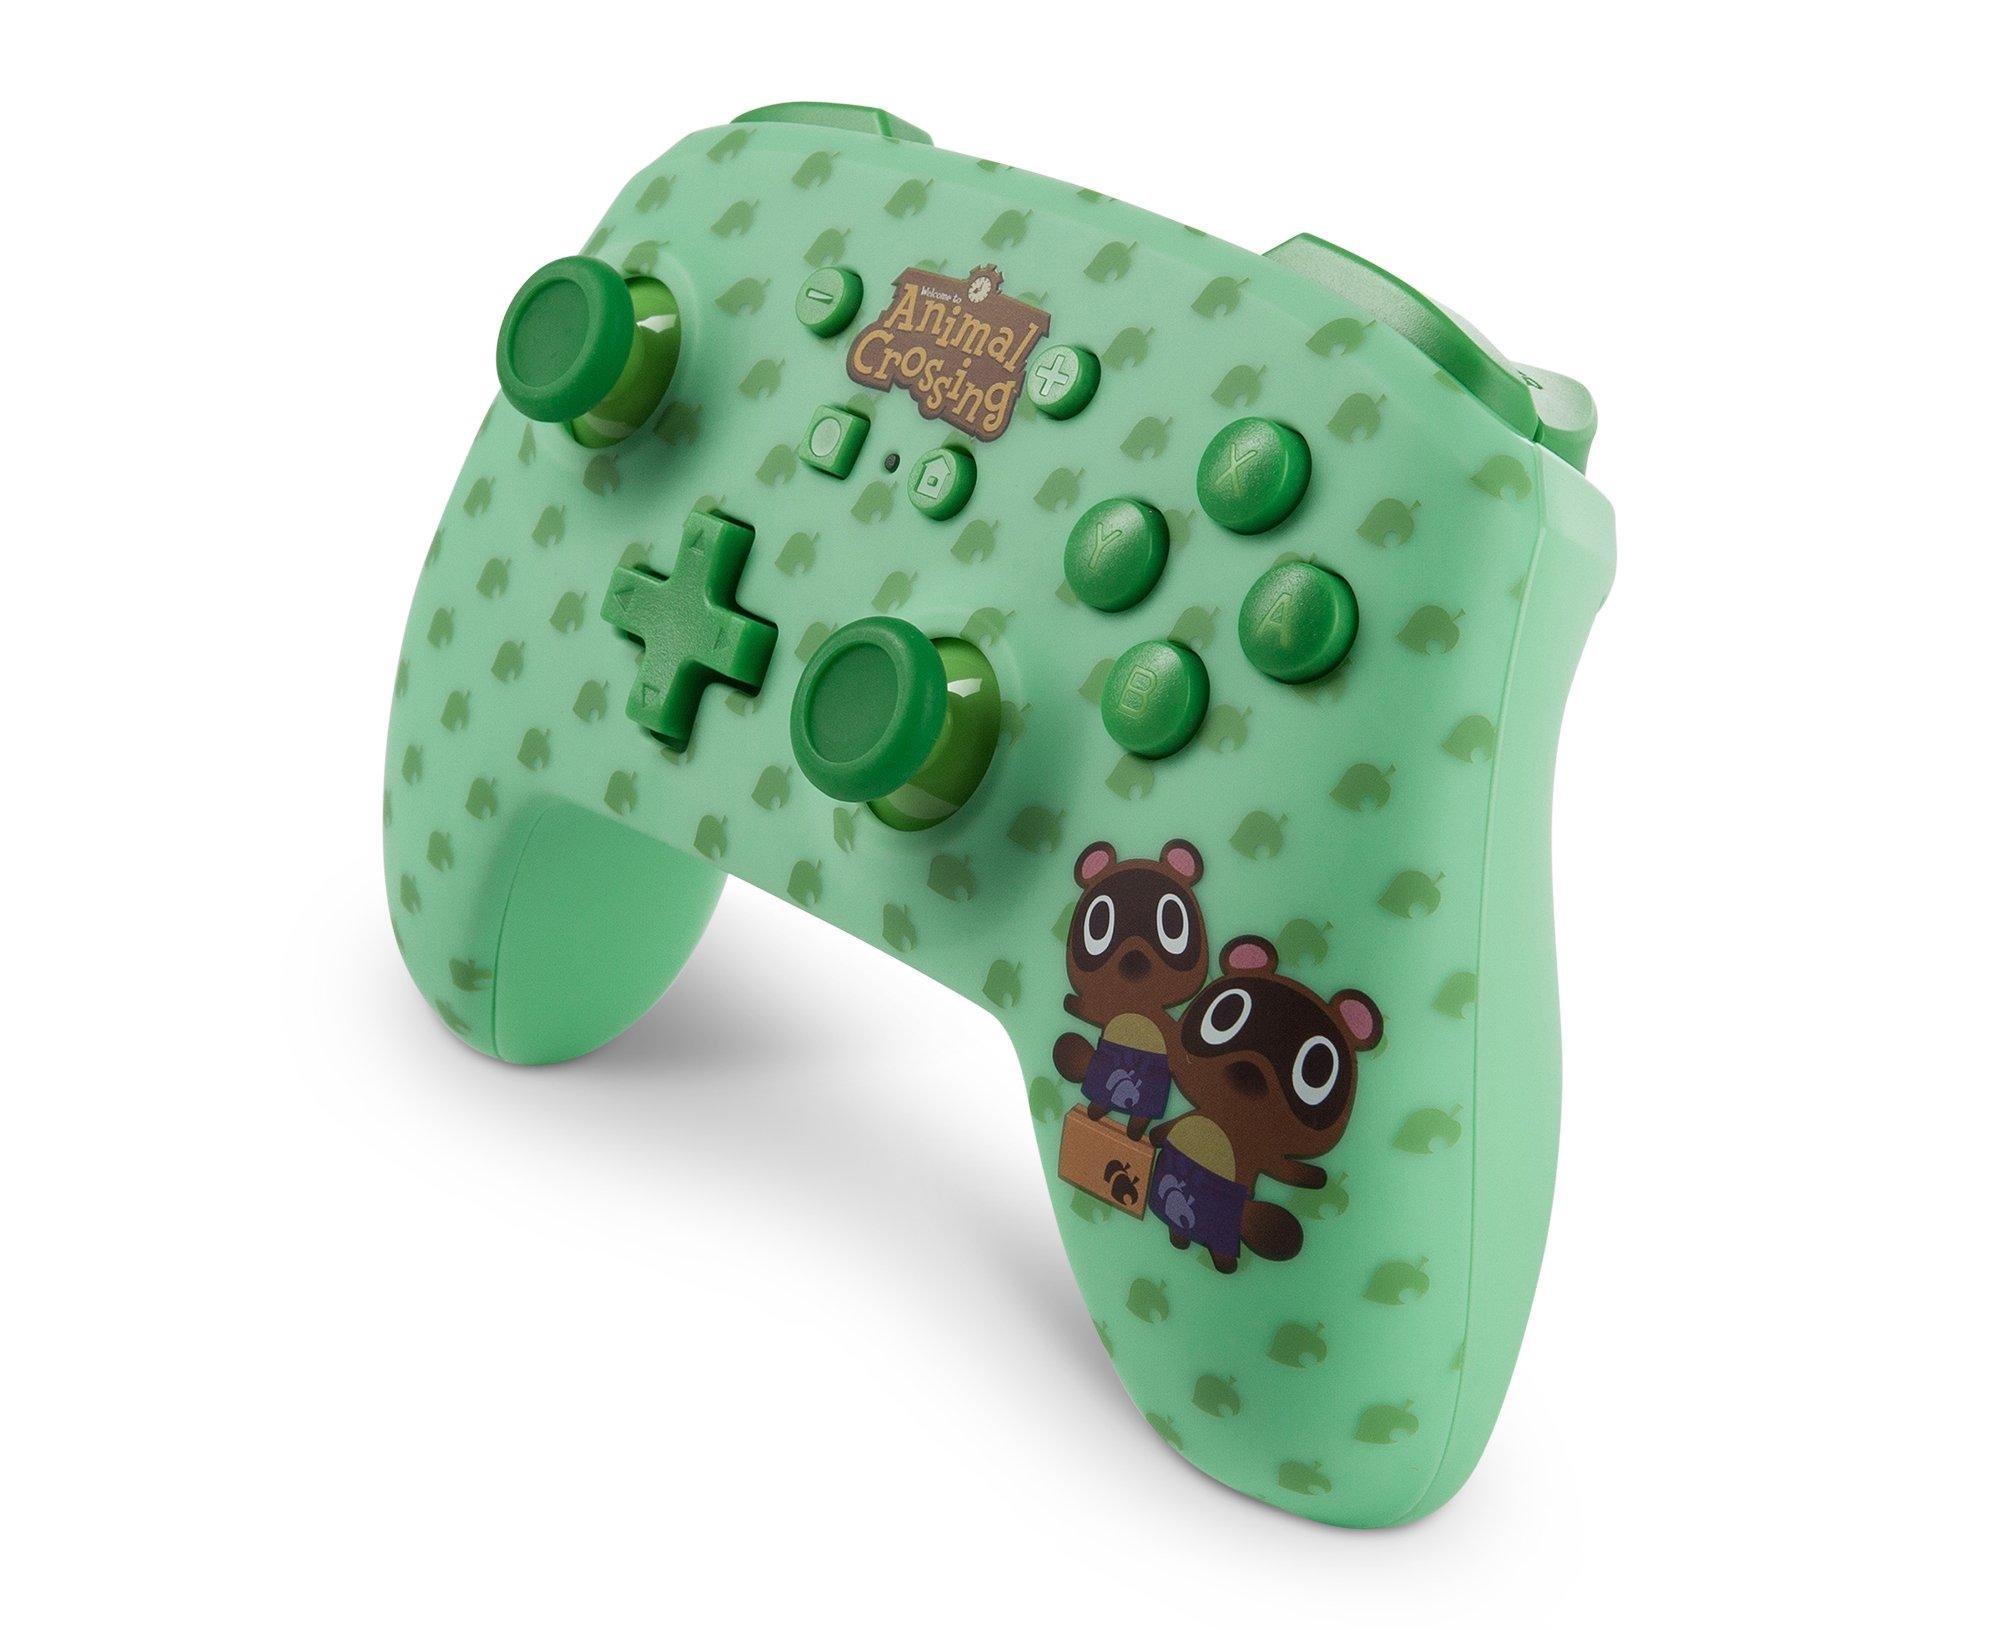 animal crossing pro controller timmy and tommy